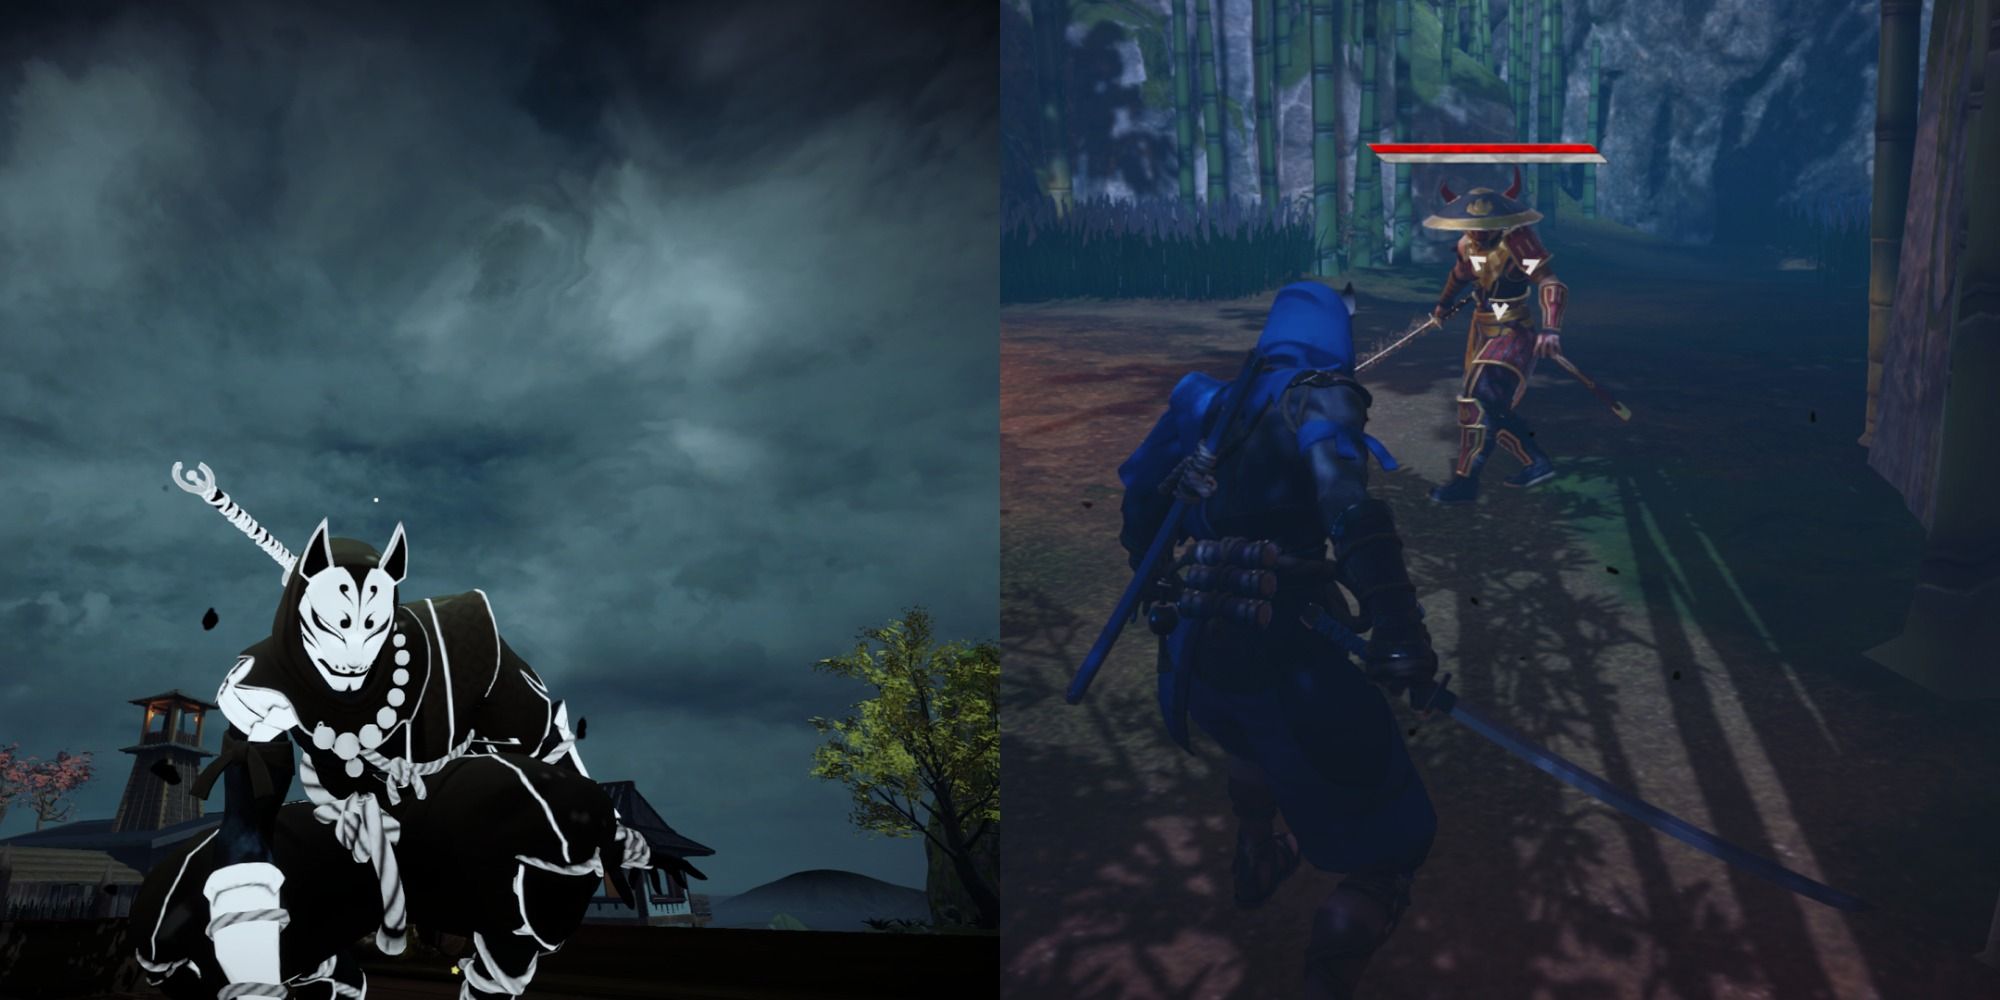 Split image Aragami crouching against a gray sky and Aragami stand-off with man in helmet Aragami 2